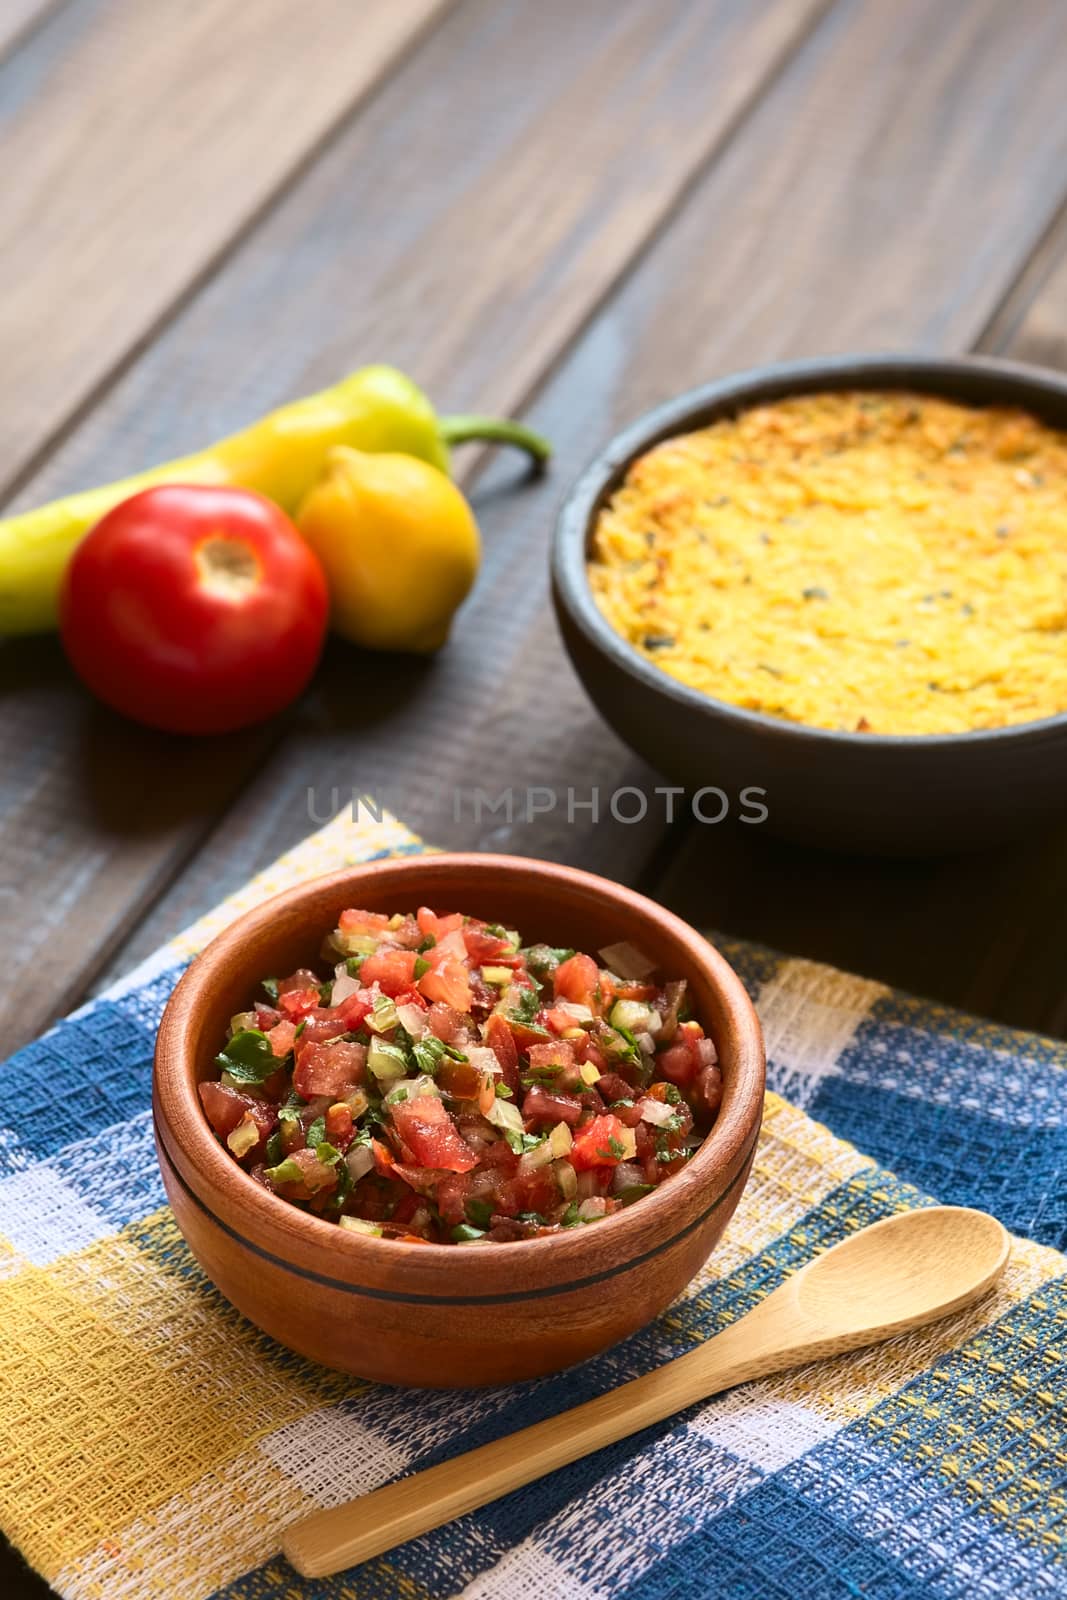 Traditional Chilean Pebre sauce made of tomato, onion, aji verde (small green hot pepper), lemon juice and coriander leaves served for barbecue and traditional dishes, photographed on wood with natural light (Selective Focus, Focus in the middle of the pebre)